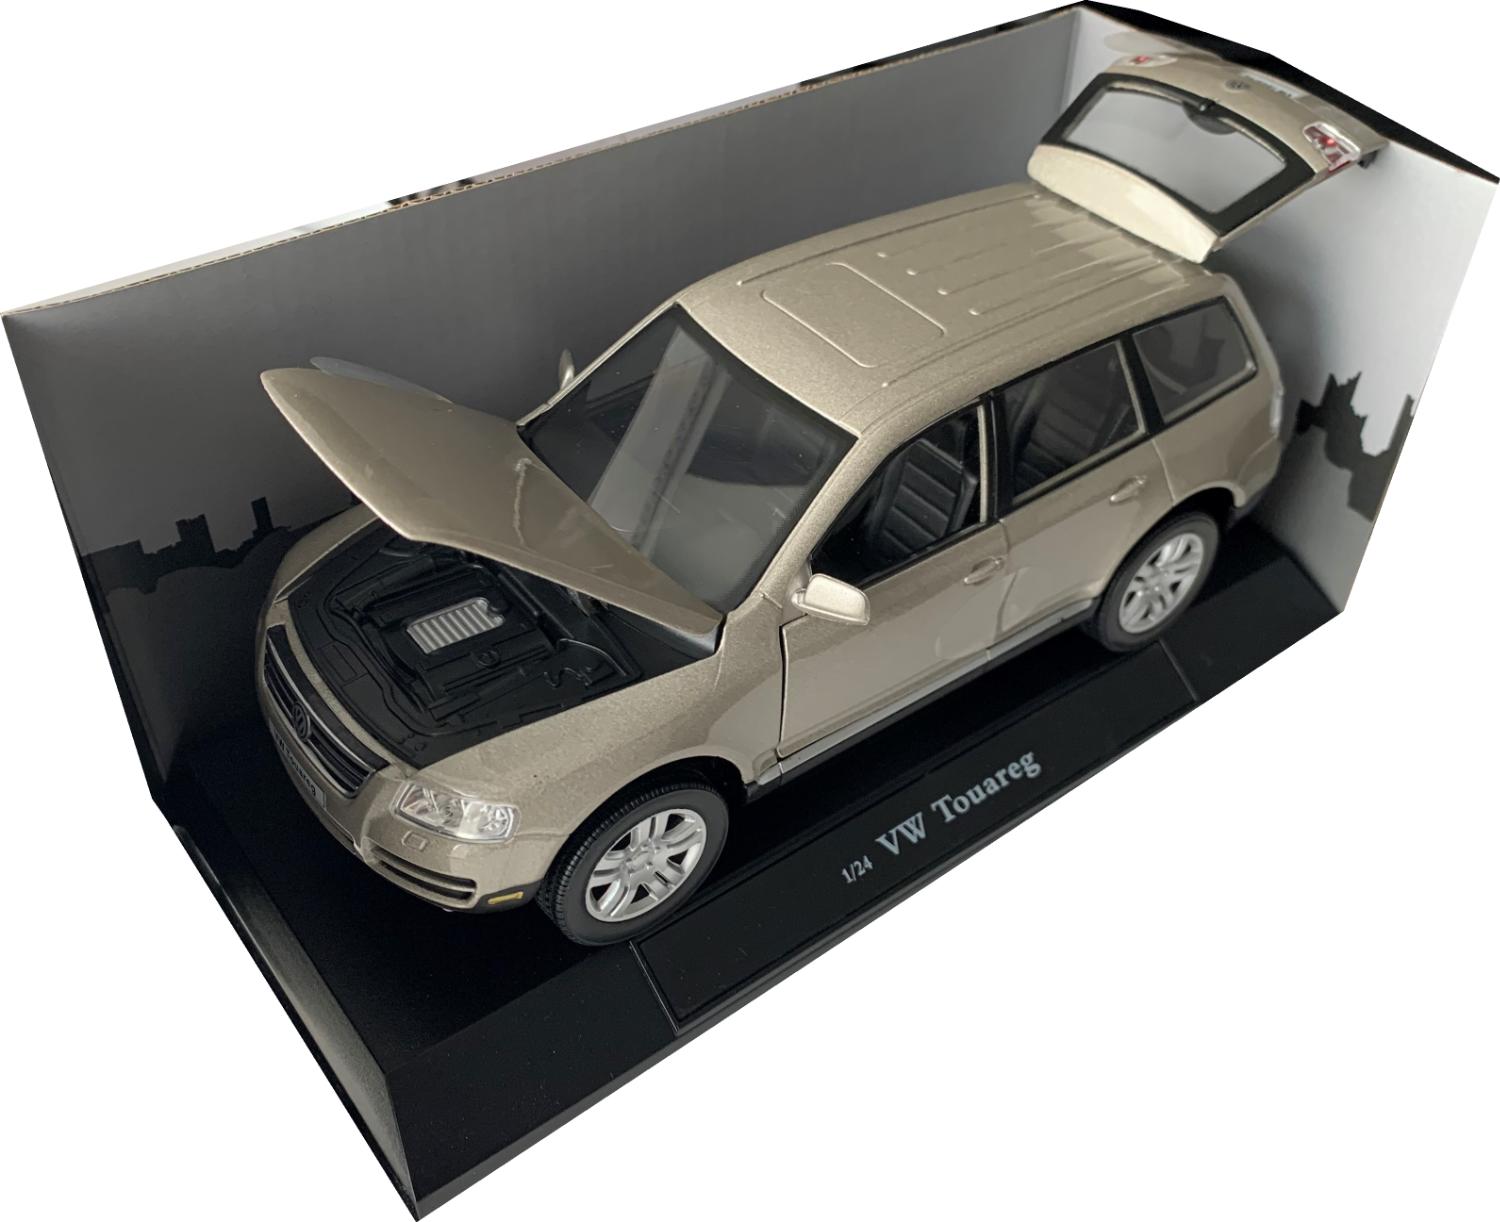 VW Touareg in champagne 1:24 scale model from Cararama